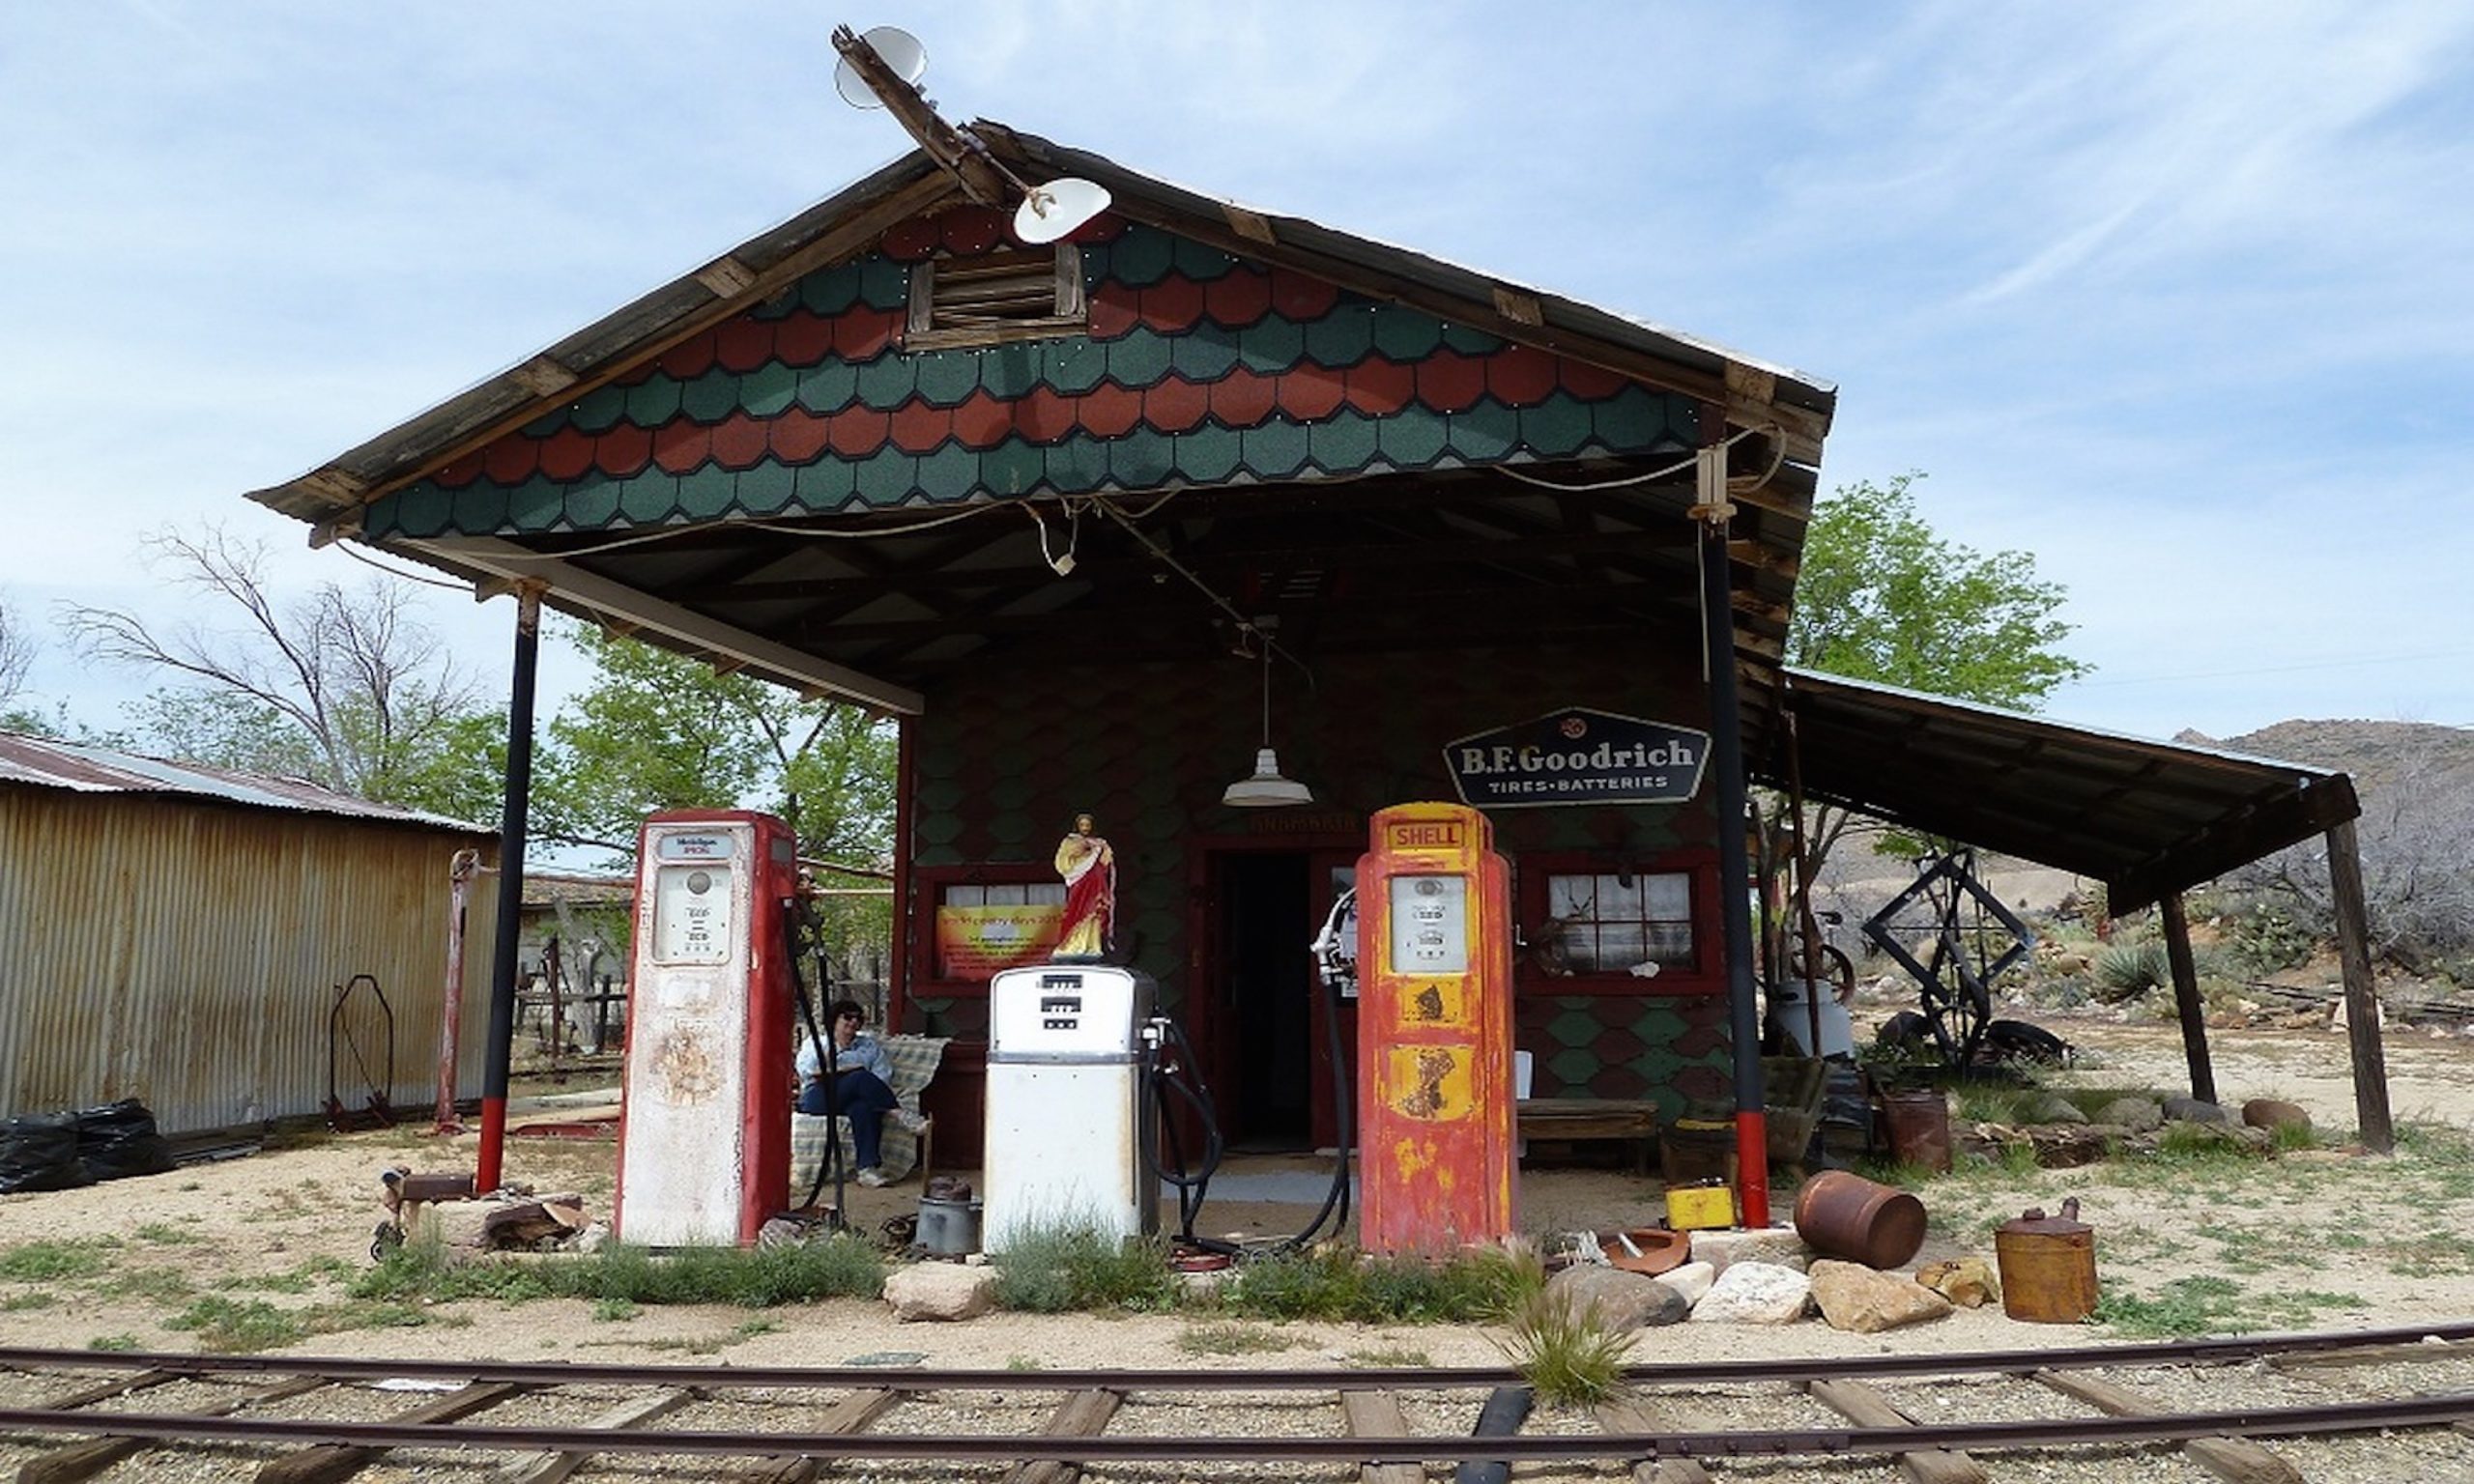 Wild West Ghost Town and Hoover tour from Las Vegas - Bindlestiff